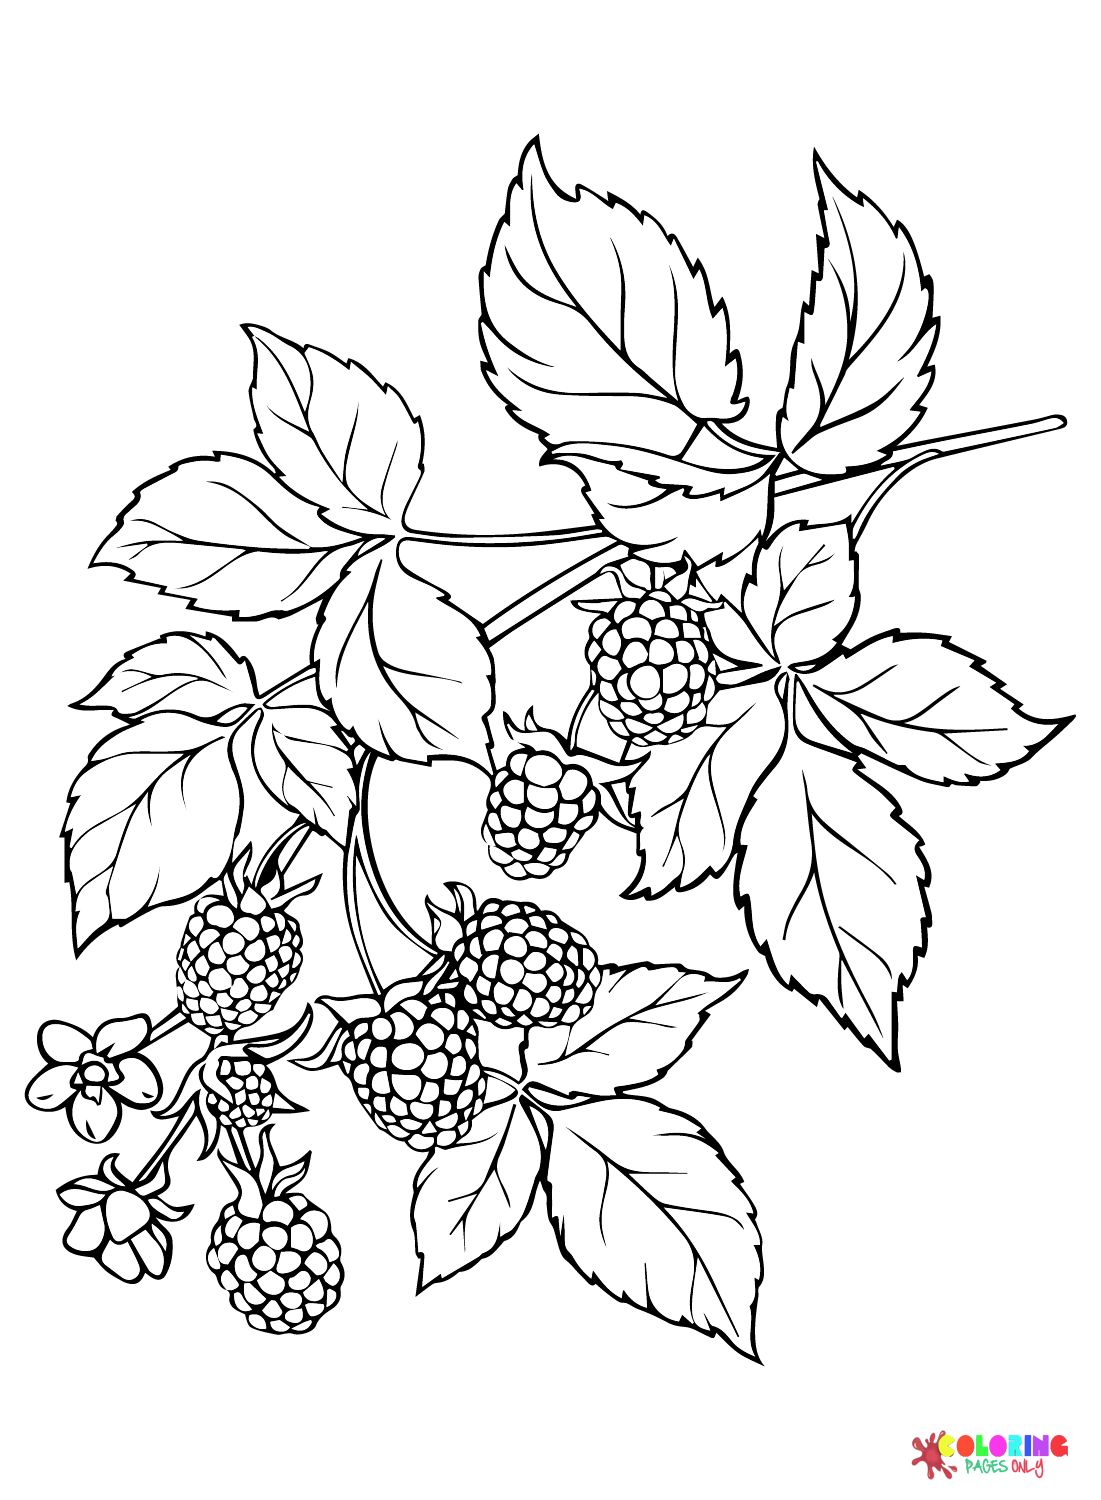 Blackberry Branch Coloring Page